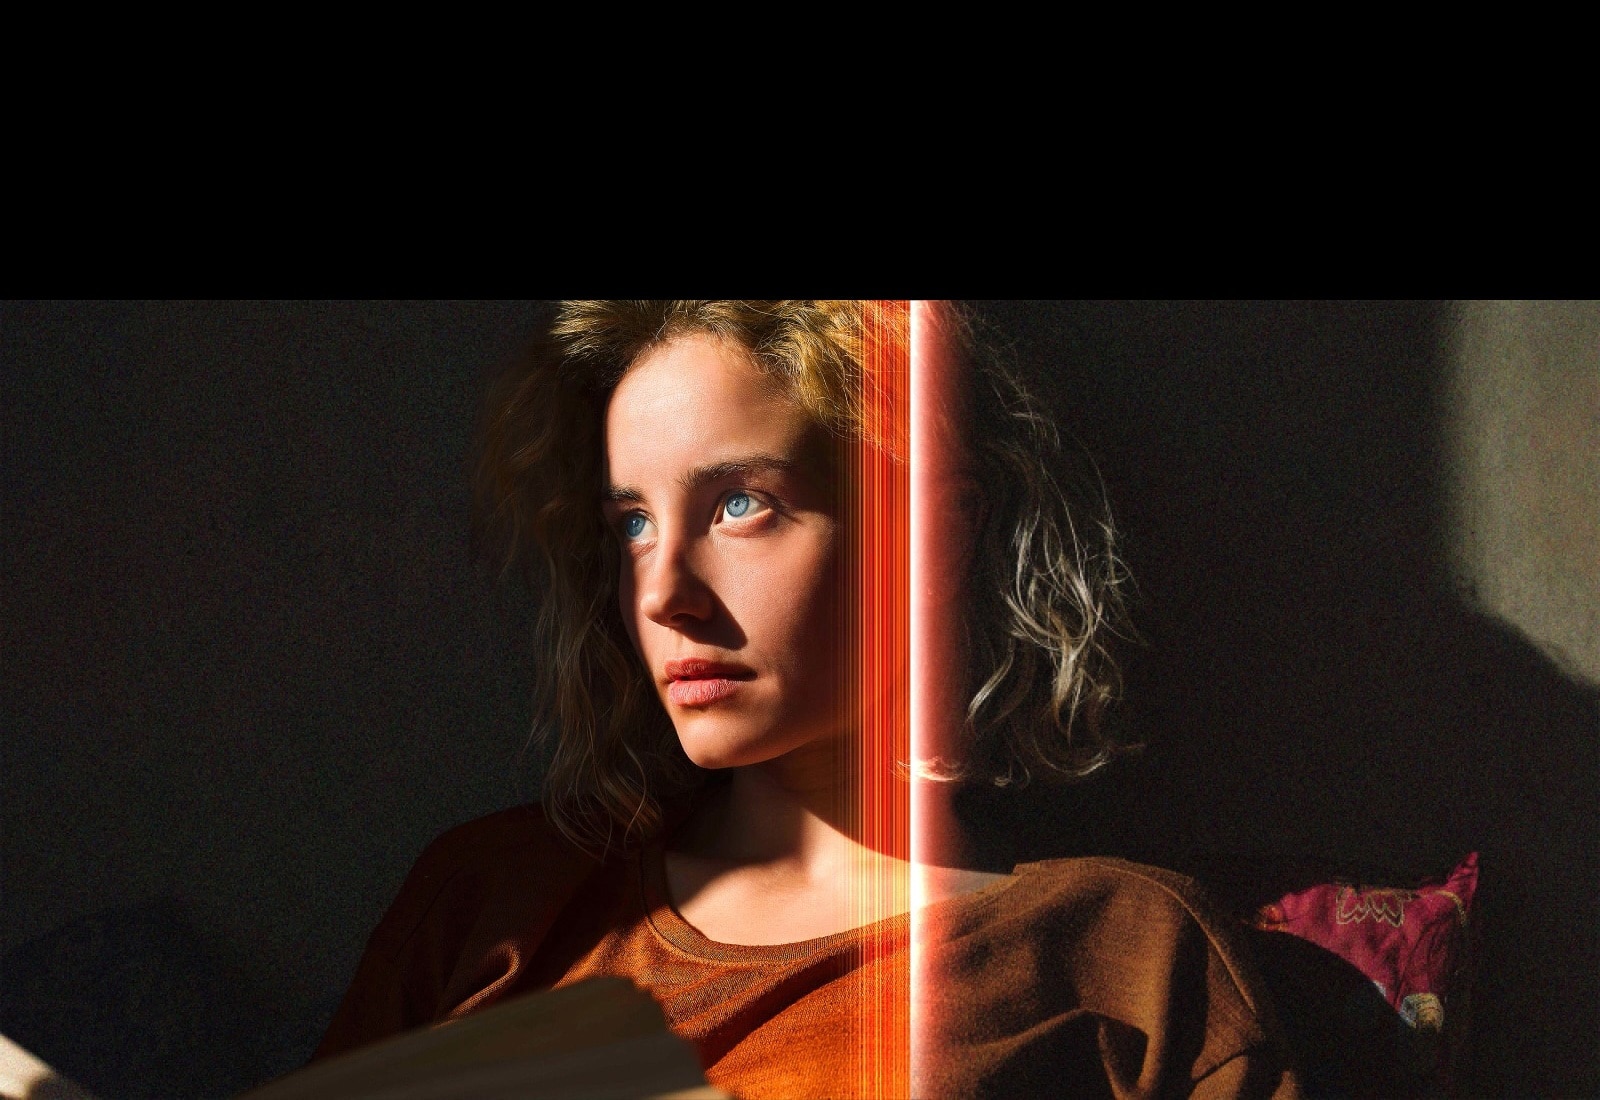 An video of a woman with piercing blue eyes and a burnt orange top in a dark space. Red lines depicting AI refinements cover part of her face, which is bright and detailed, while the rest of the image looks dull.	